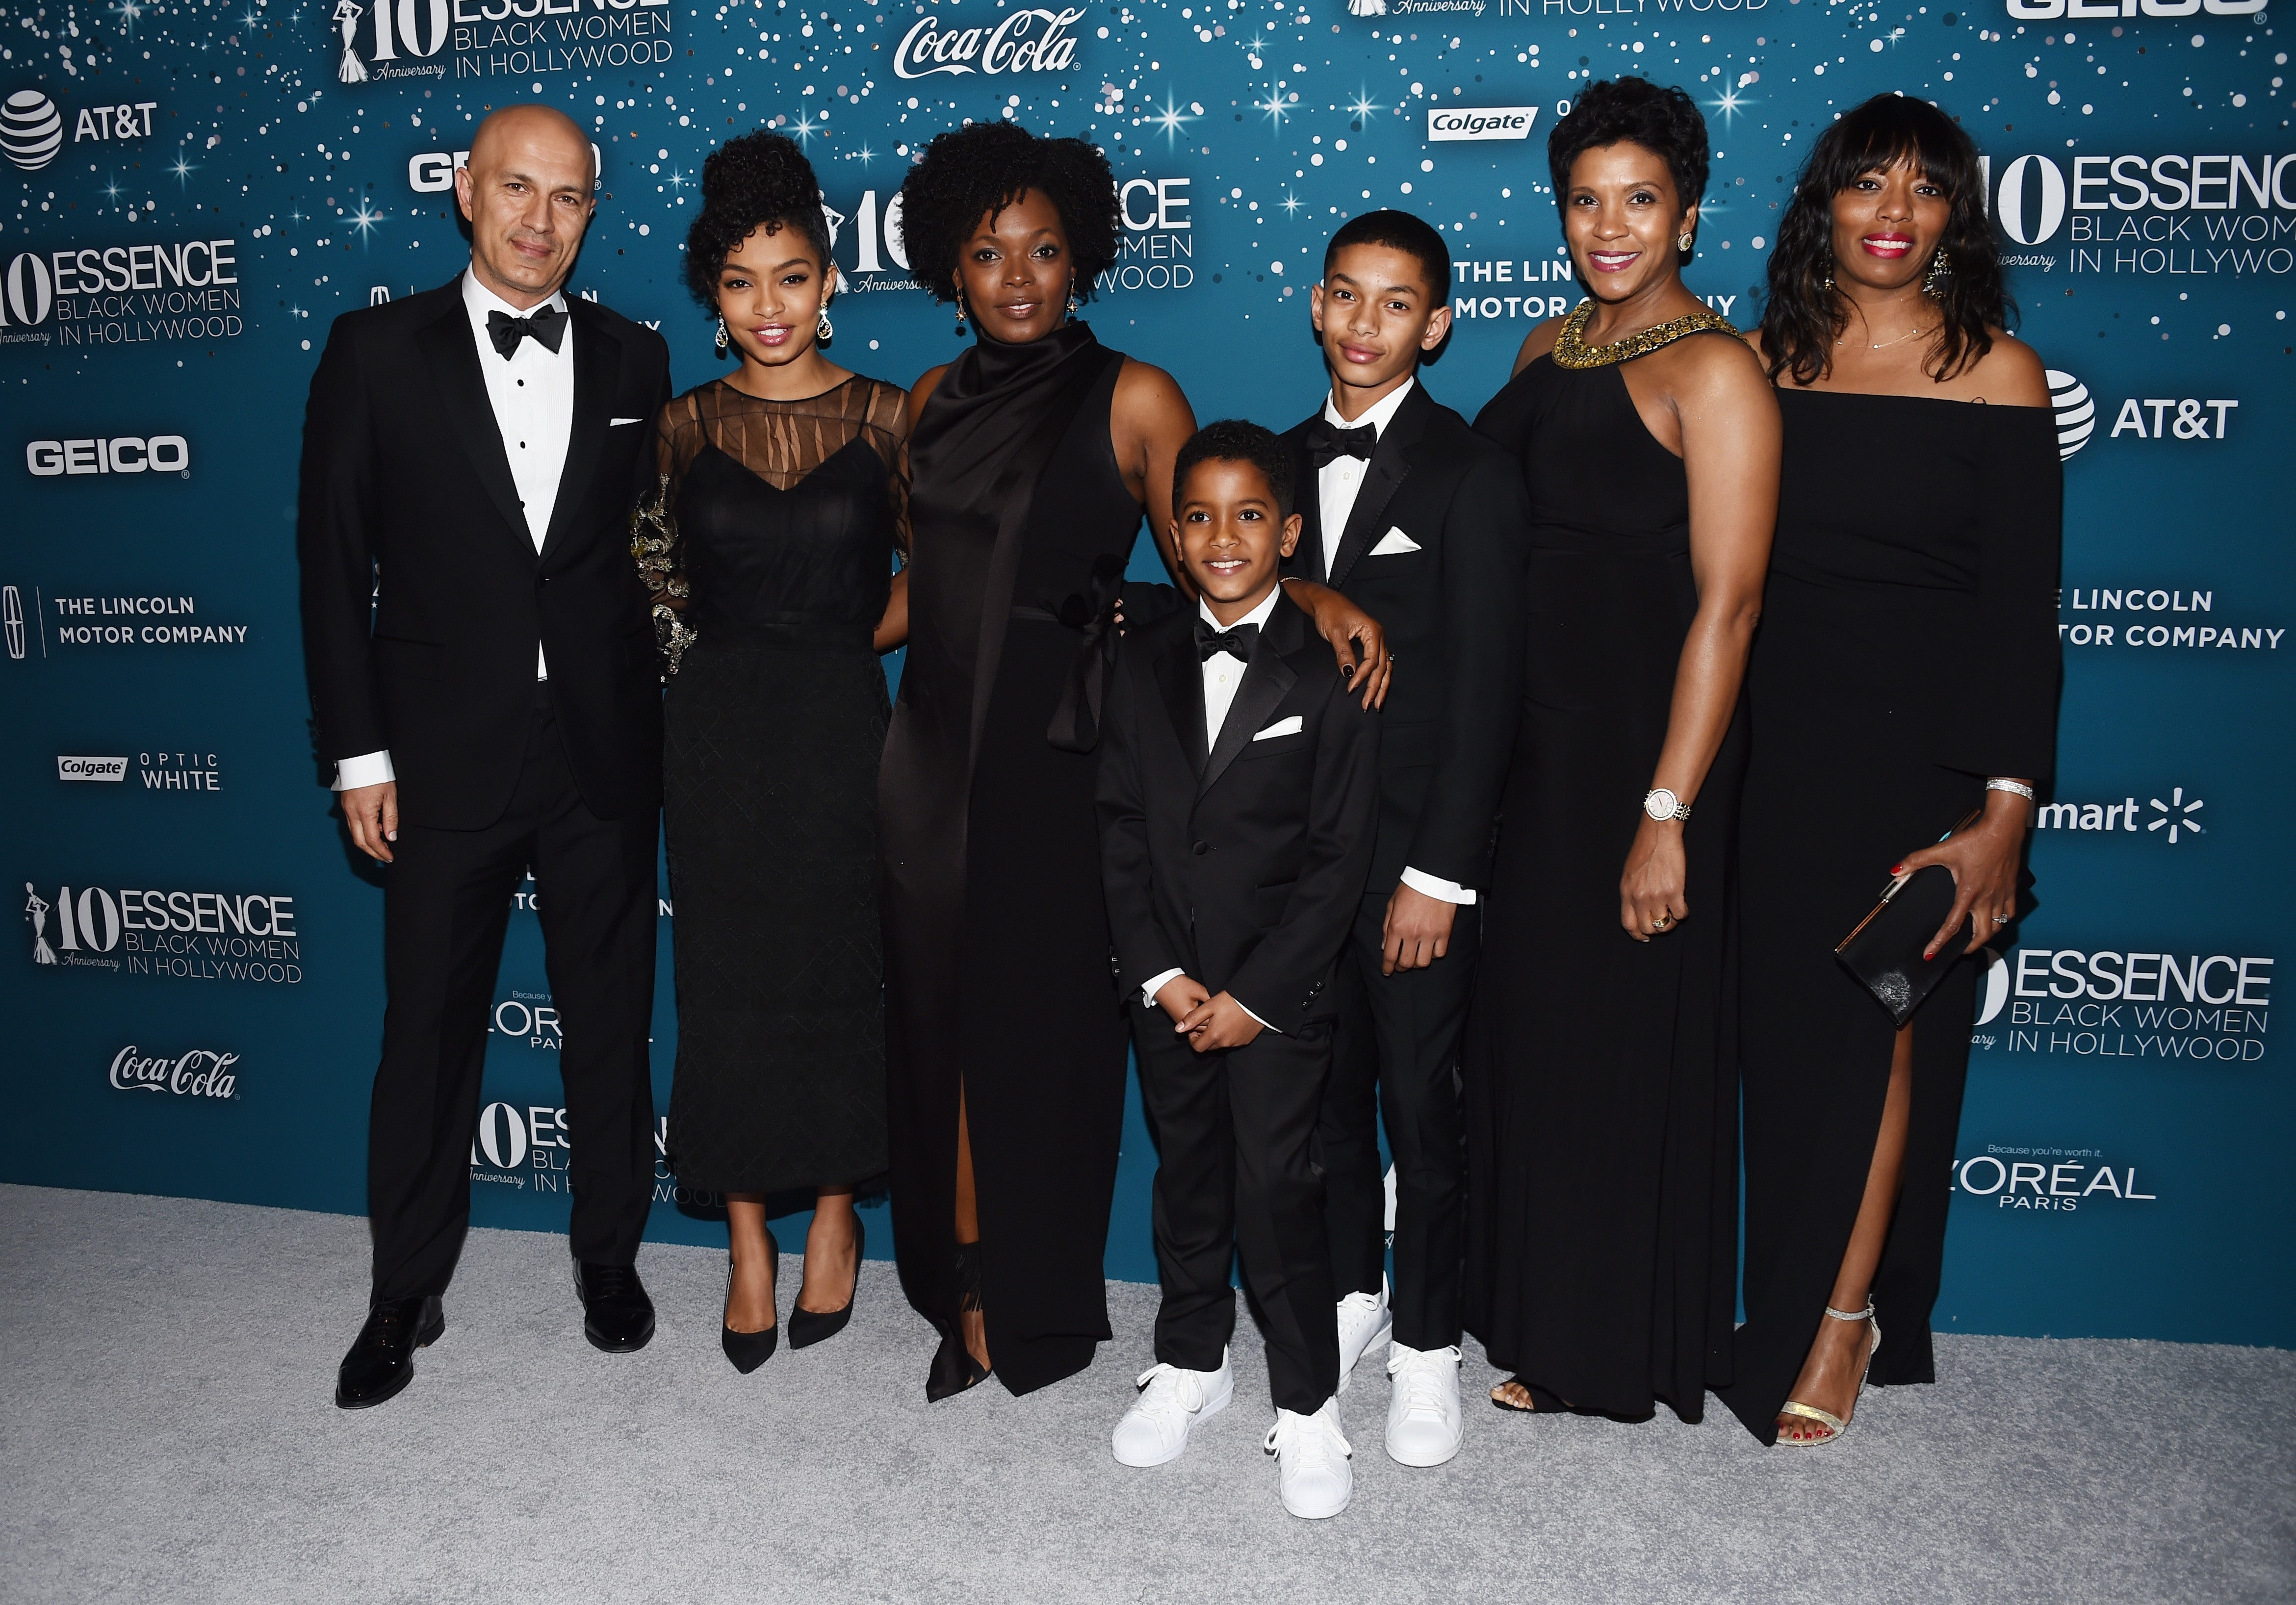 Photo Fab: Yara Shahidi Brings Her Beautiful Family Out for Black Women in Hollywood Awards